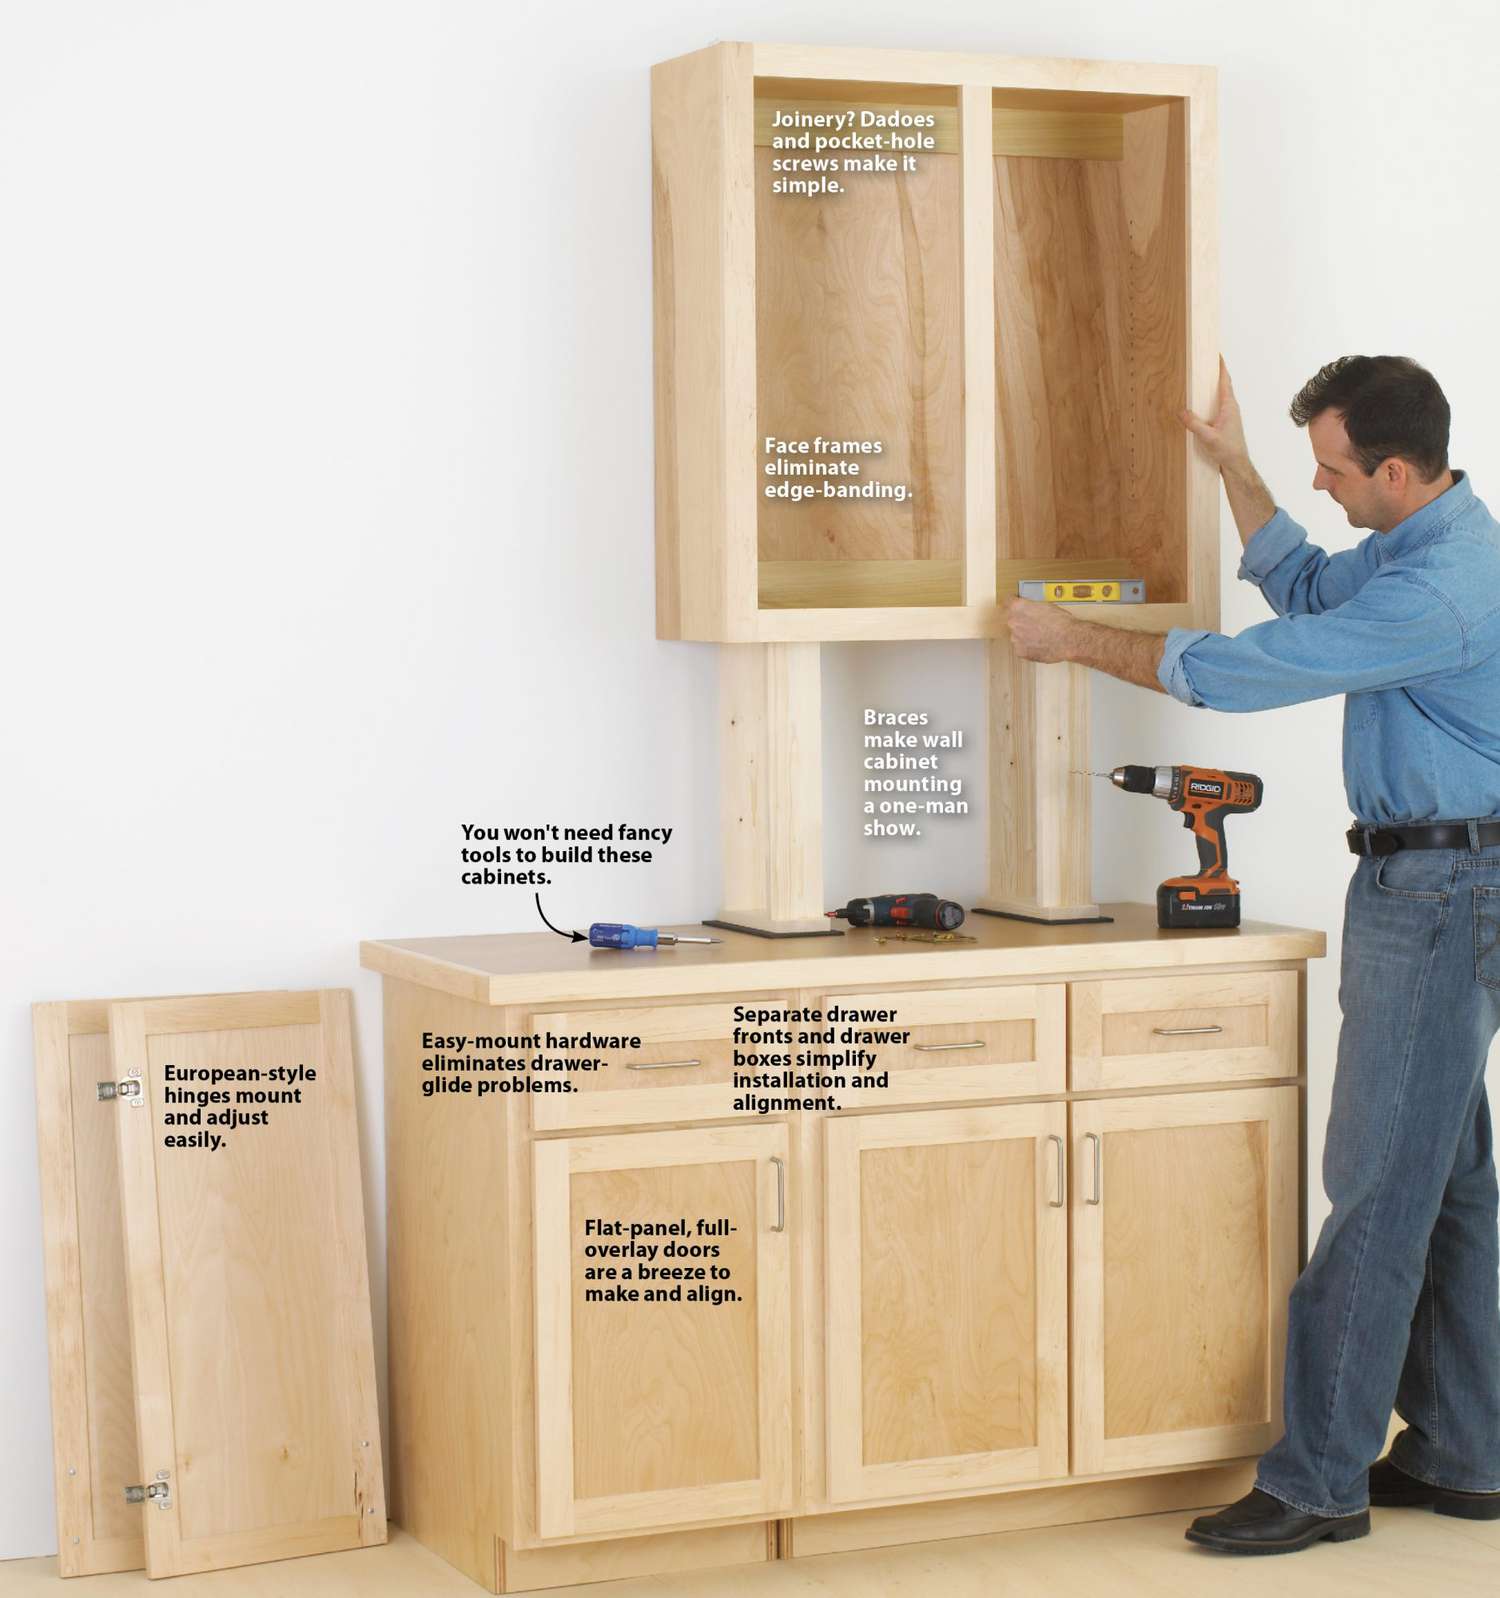 Make Cabinets The Easy Way Wood, What Tools Do You Need To Install Kitchen Cabinets